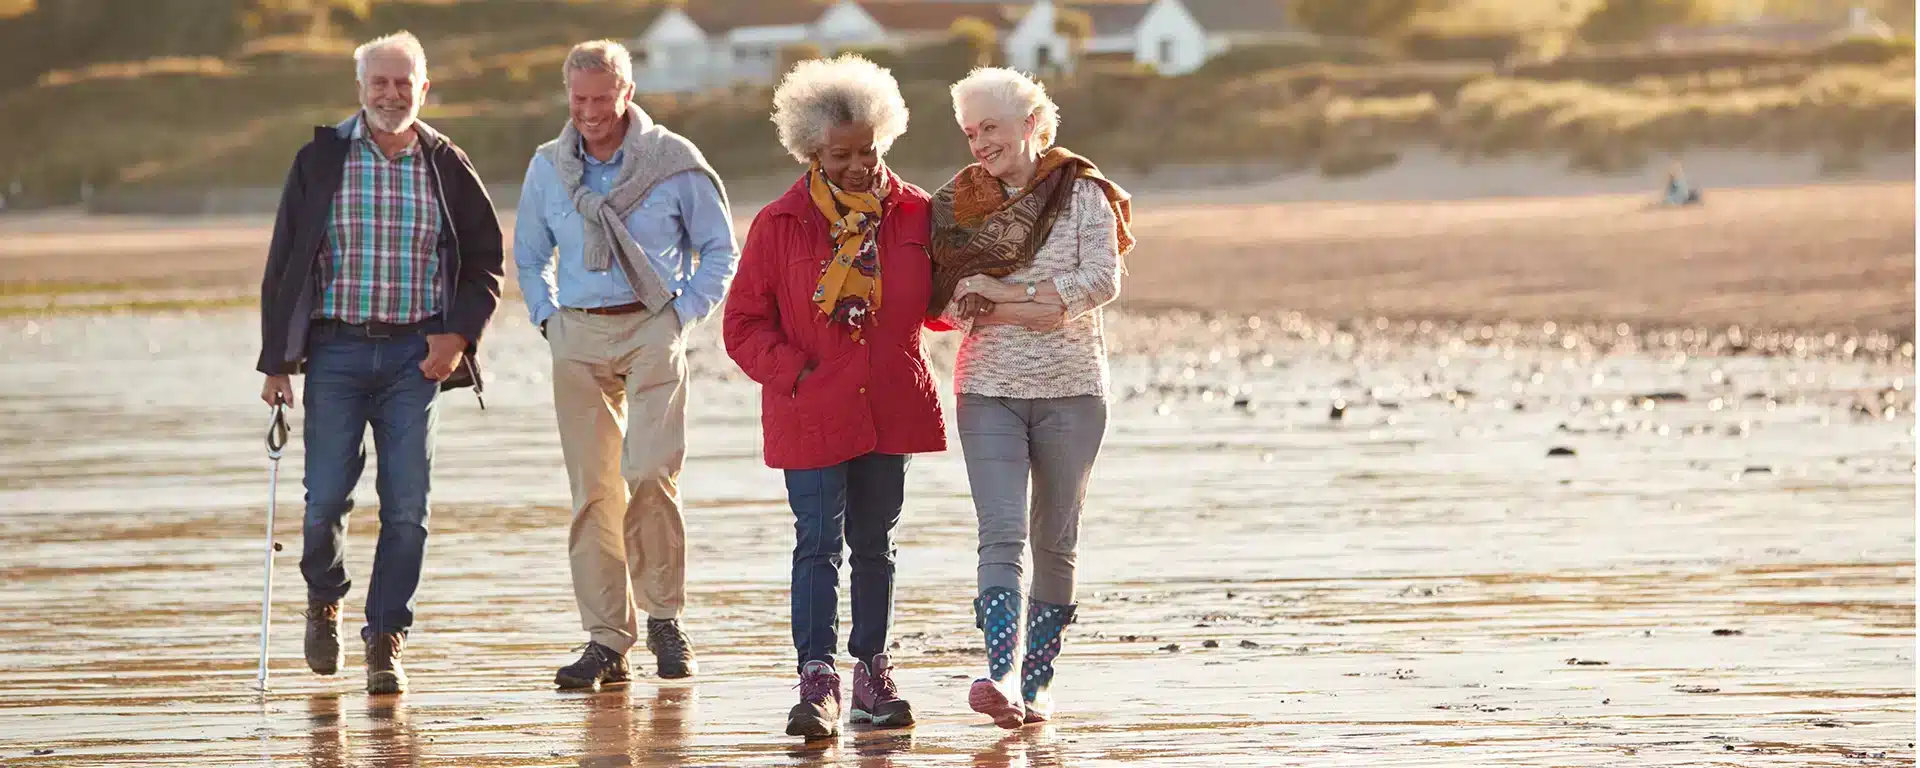 A group of seniors walking together on the beach on a windy day.